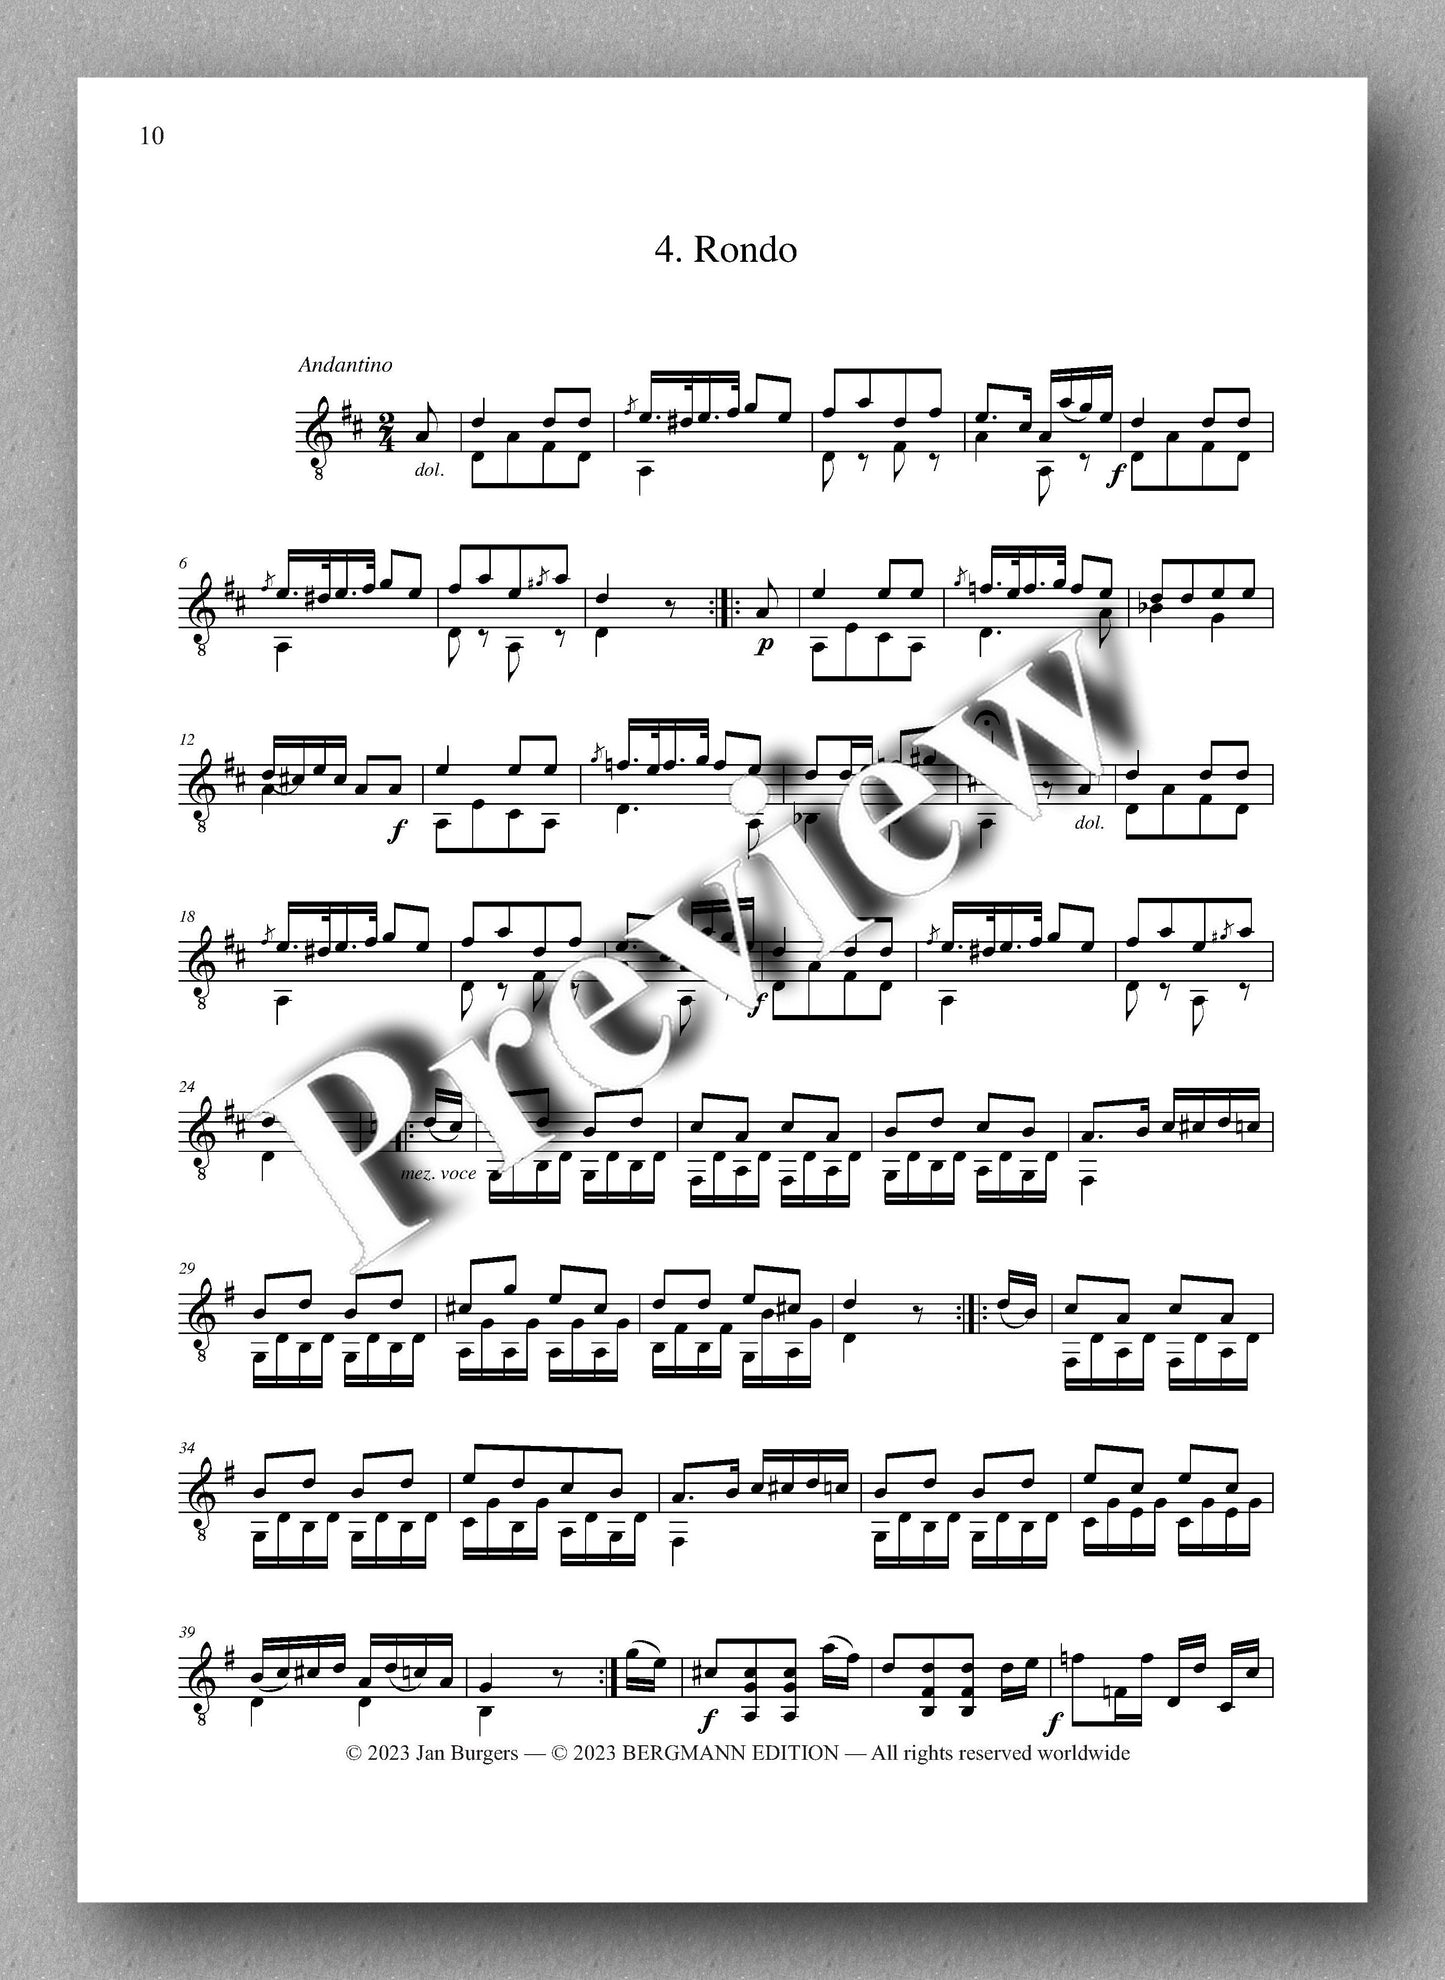 Molino, Collected Works for Guitar Solo, Vol. 6 - preview of the music score 4